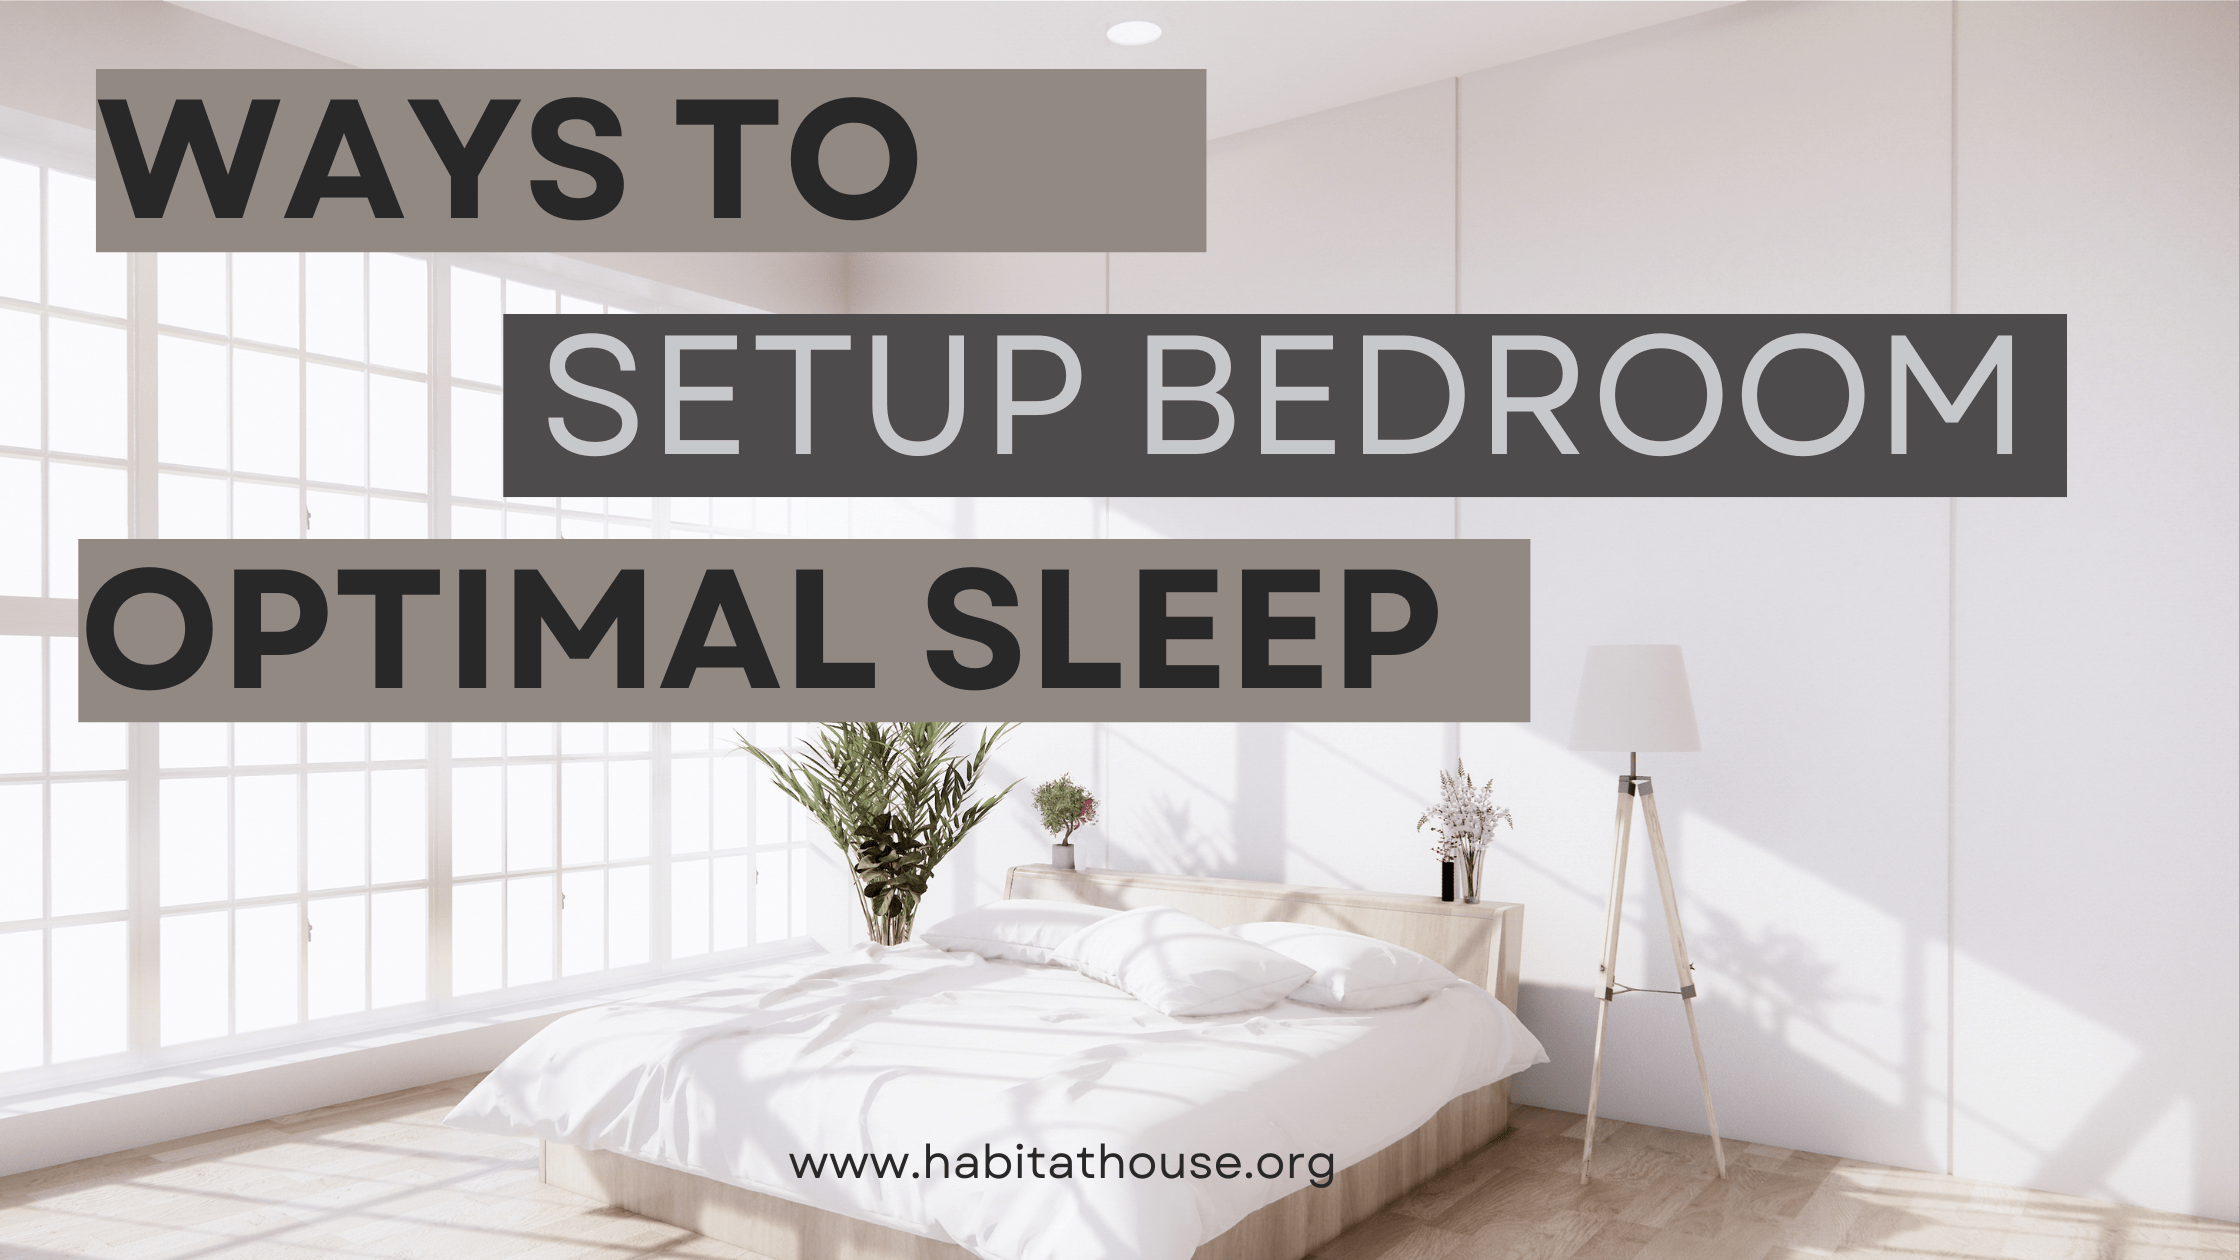 What is the Best Way to Set up a Bedroom for Optimal Sleep?